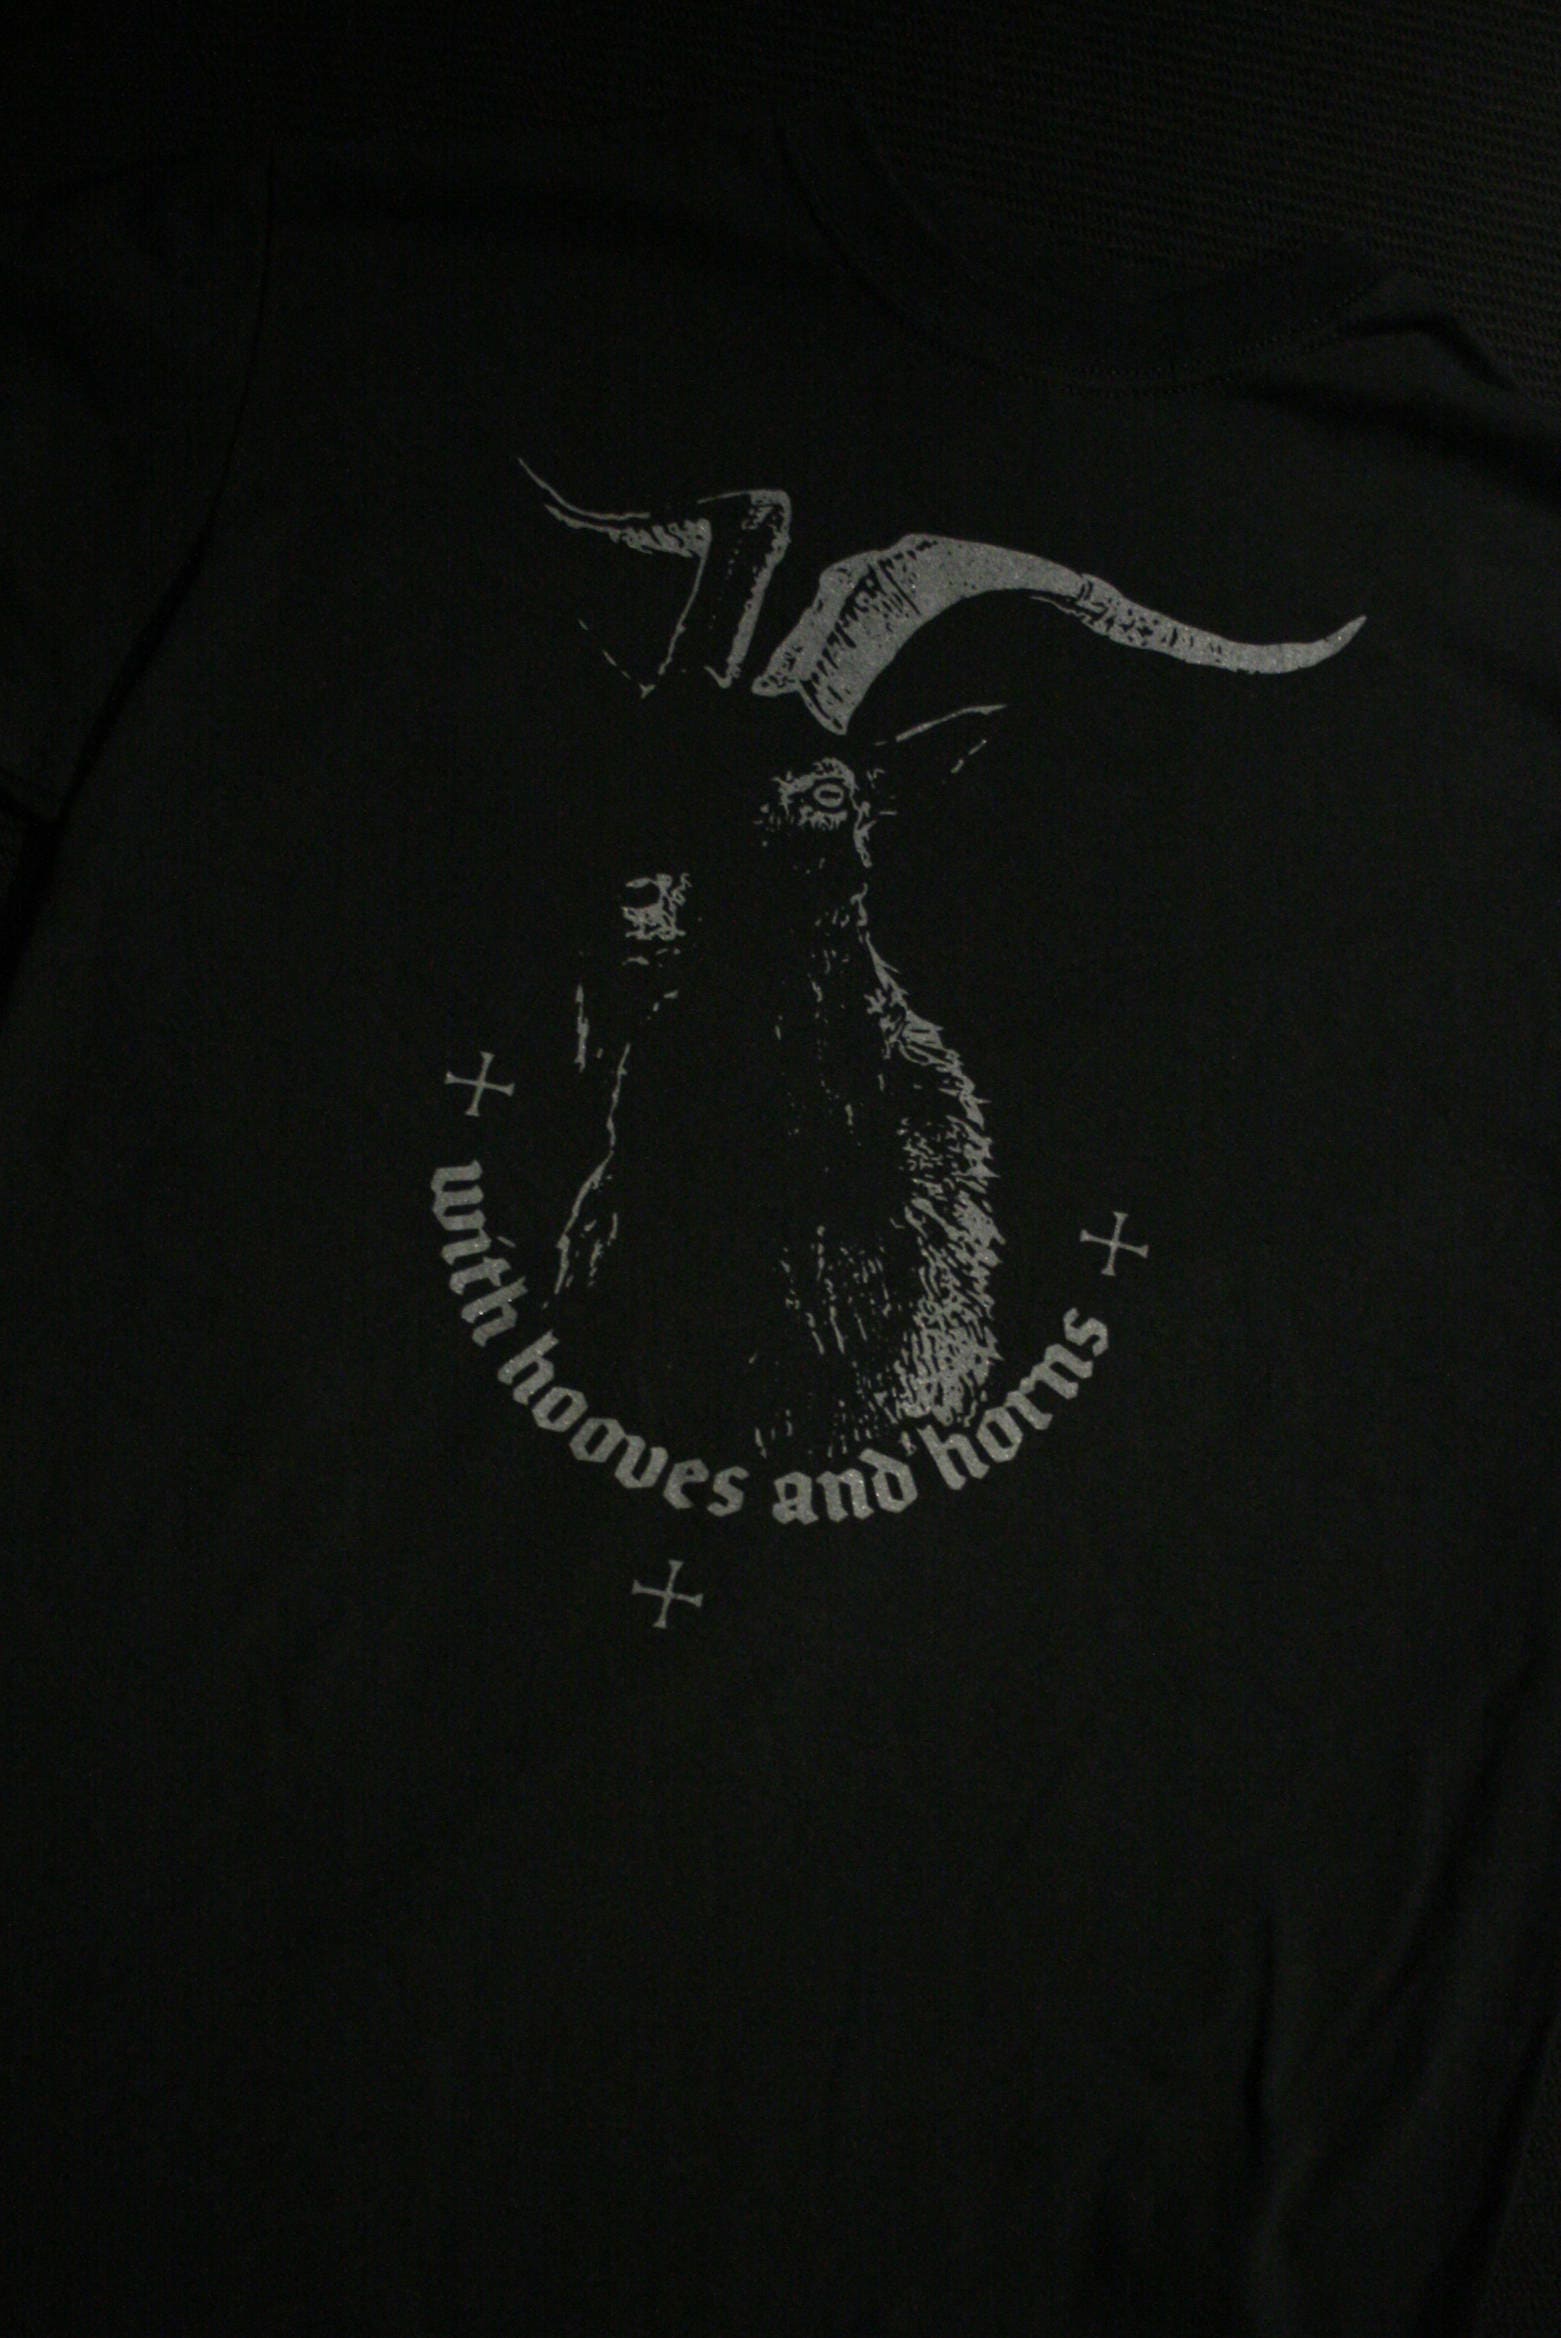 With hooves and horns T-shirt female fitted